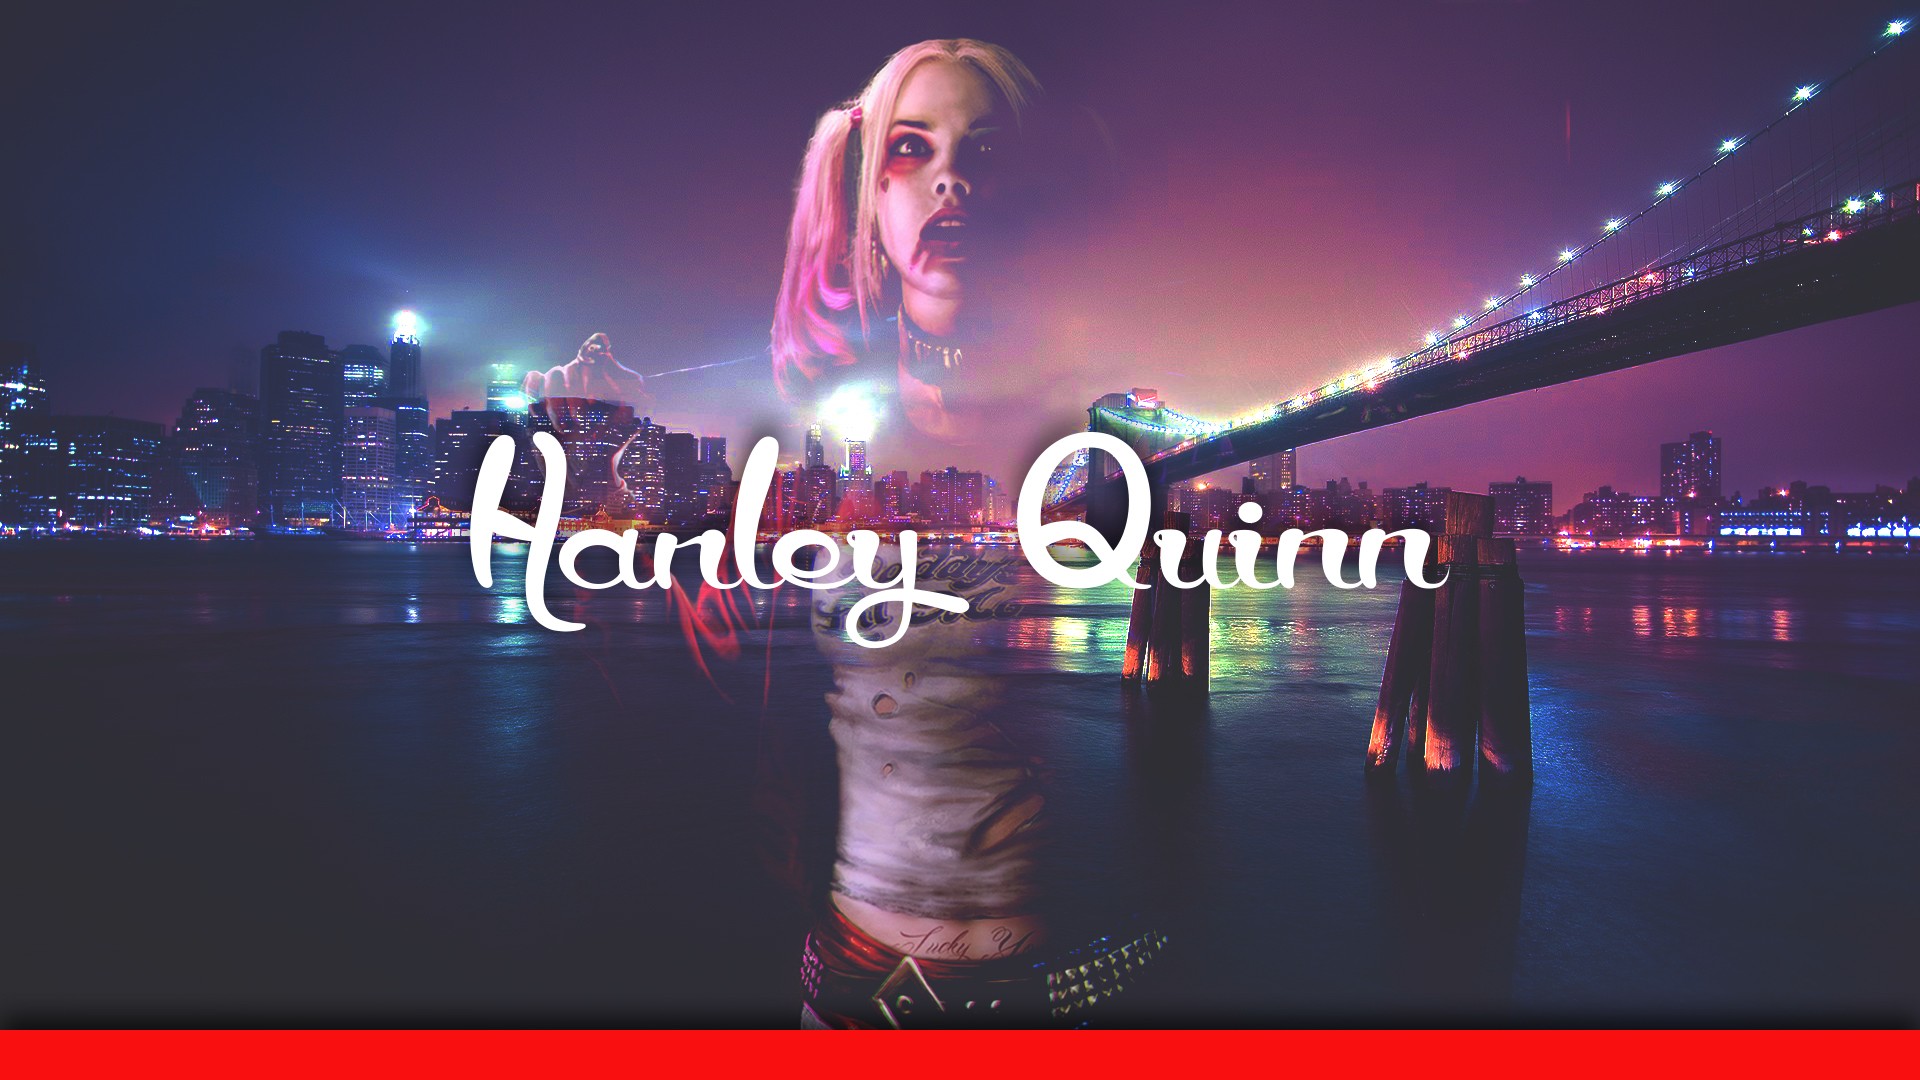 women, Harley Quinn, Photoshopped, Abstract Wallpaper